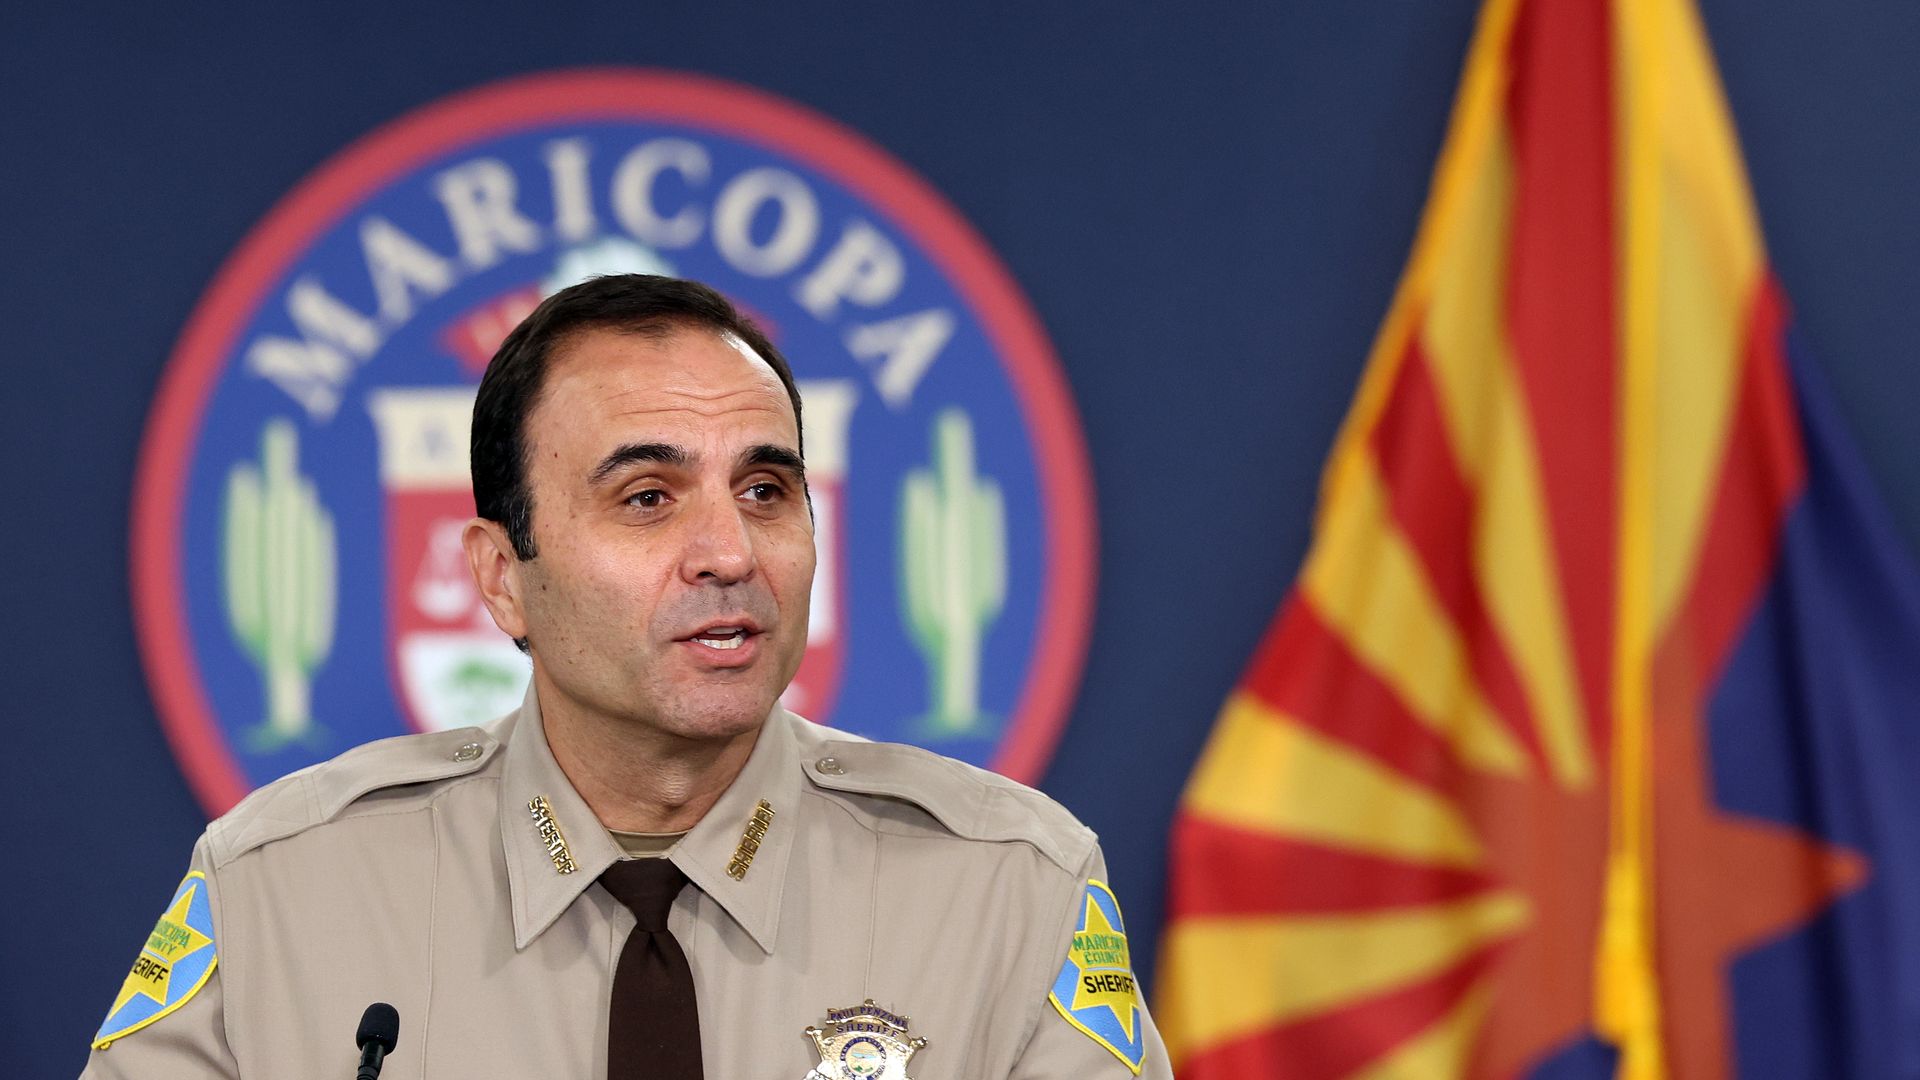 A man in a beige law enforcement uniform speaks in front of a large emblem that says Maricopa.